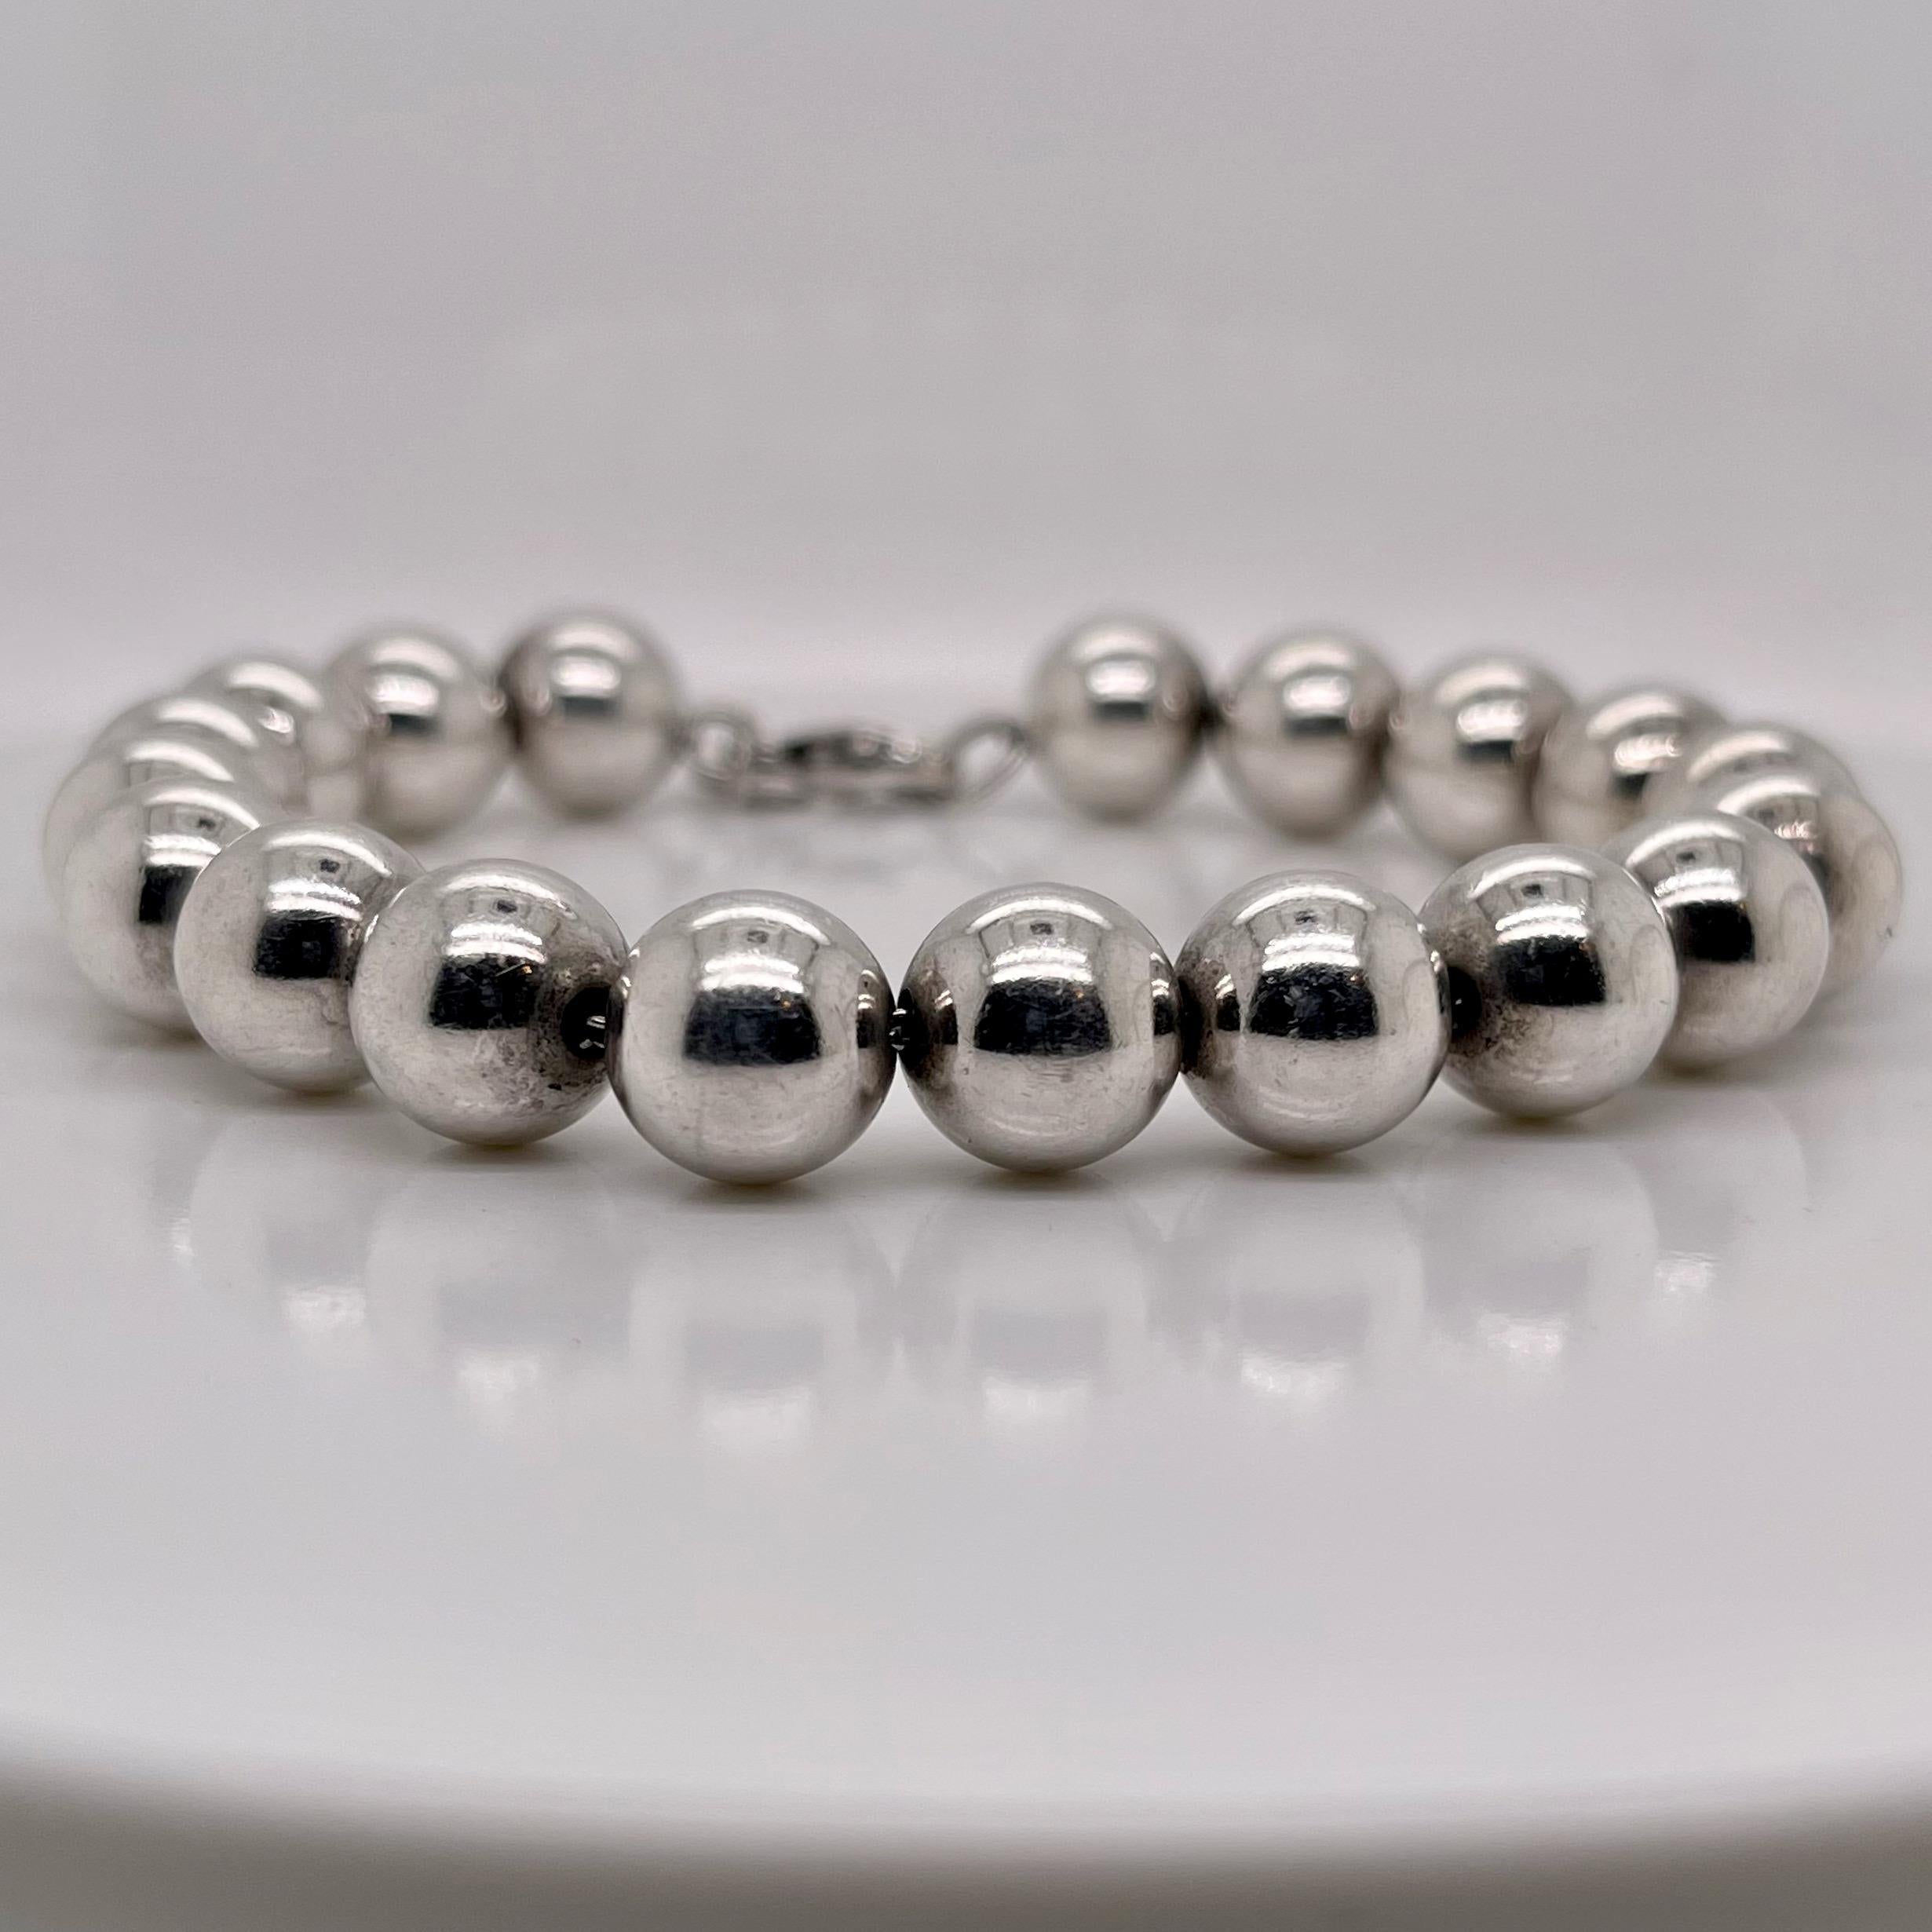 A fine Tiffany & Co. beaded bracelet.

In sterling silver with 10 mm beads and a lobster claw clasp.

Marked for Tiffany & Co and 925 for sterling silver fineness.

A wonderful bracelet and great Tiffany design!

Date:
20th Century

Overall